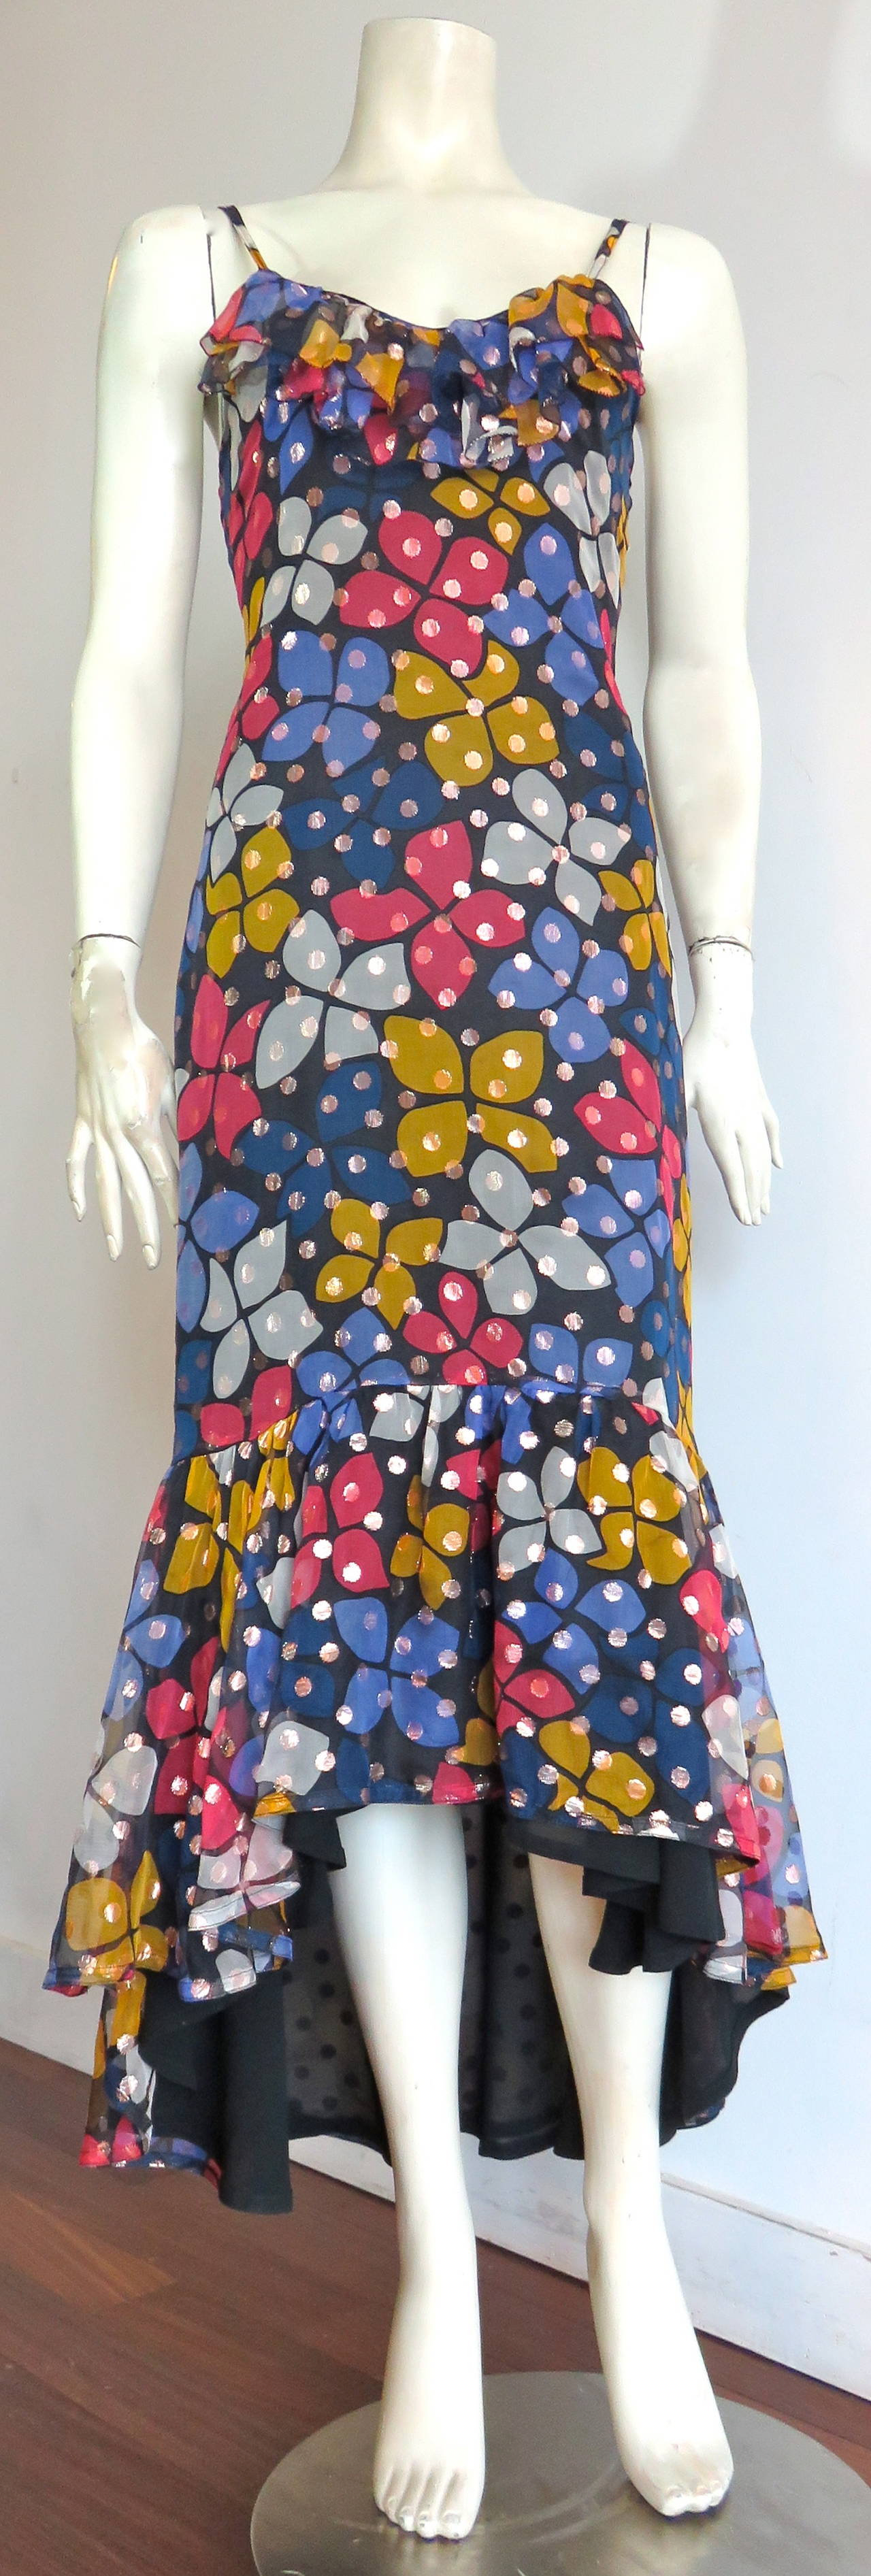 Excellent condition, 1970's, SONIA RYKIEL metallic silk floral dress.

This fabulous dress features a multi-color, floral printed artwork with dark, midnight, blue ground, and metallic gold, woven dot pattern within the fabrication.

Ruffle